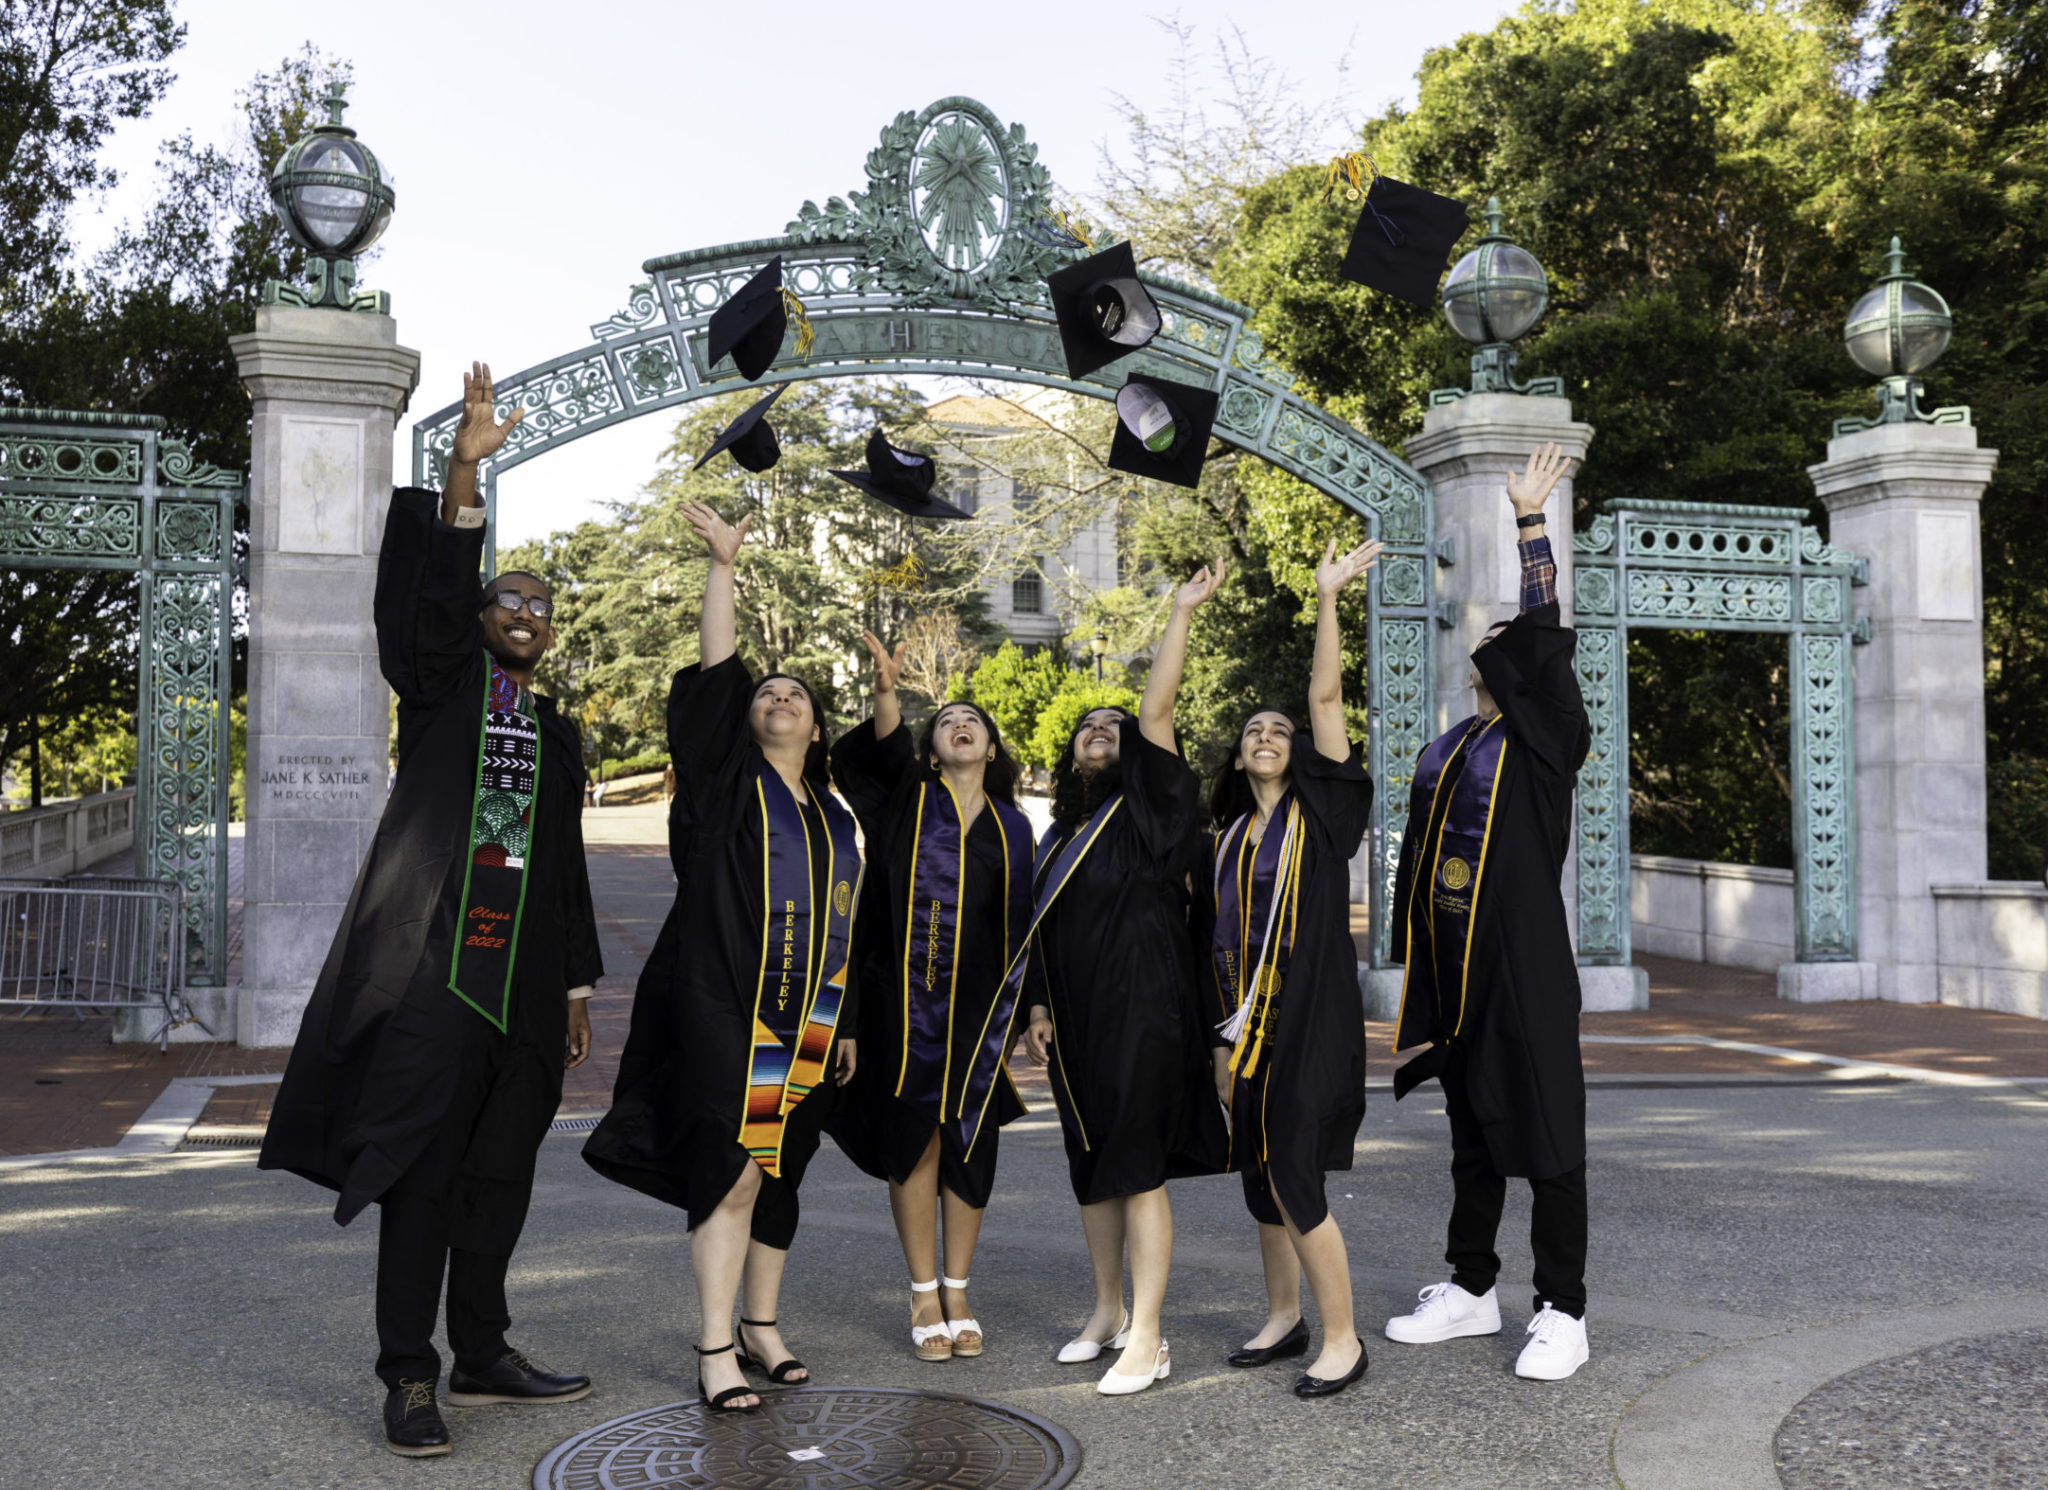 A group of scholars dressed in graduation gowns throw their graduation caps into the air in front of Sather Gate.